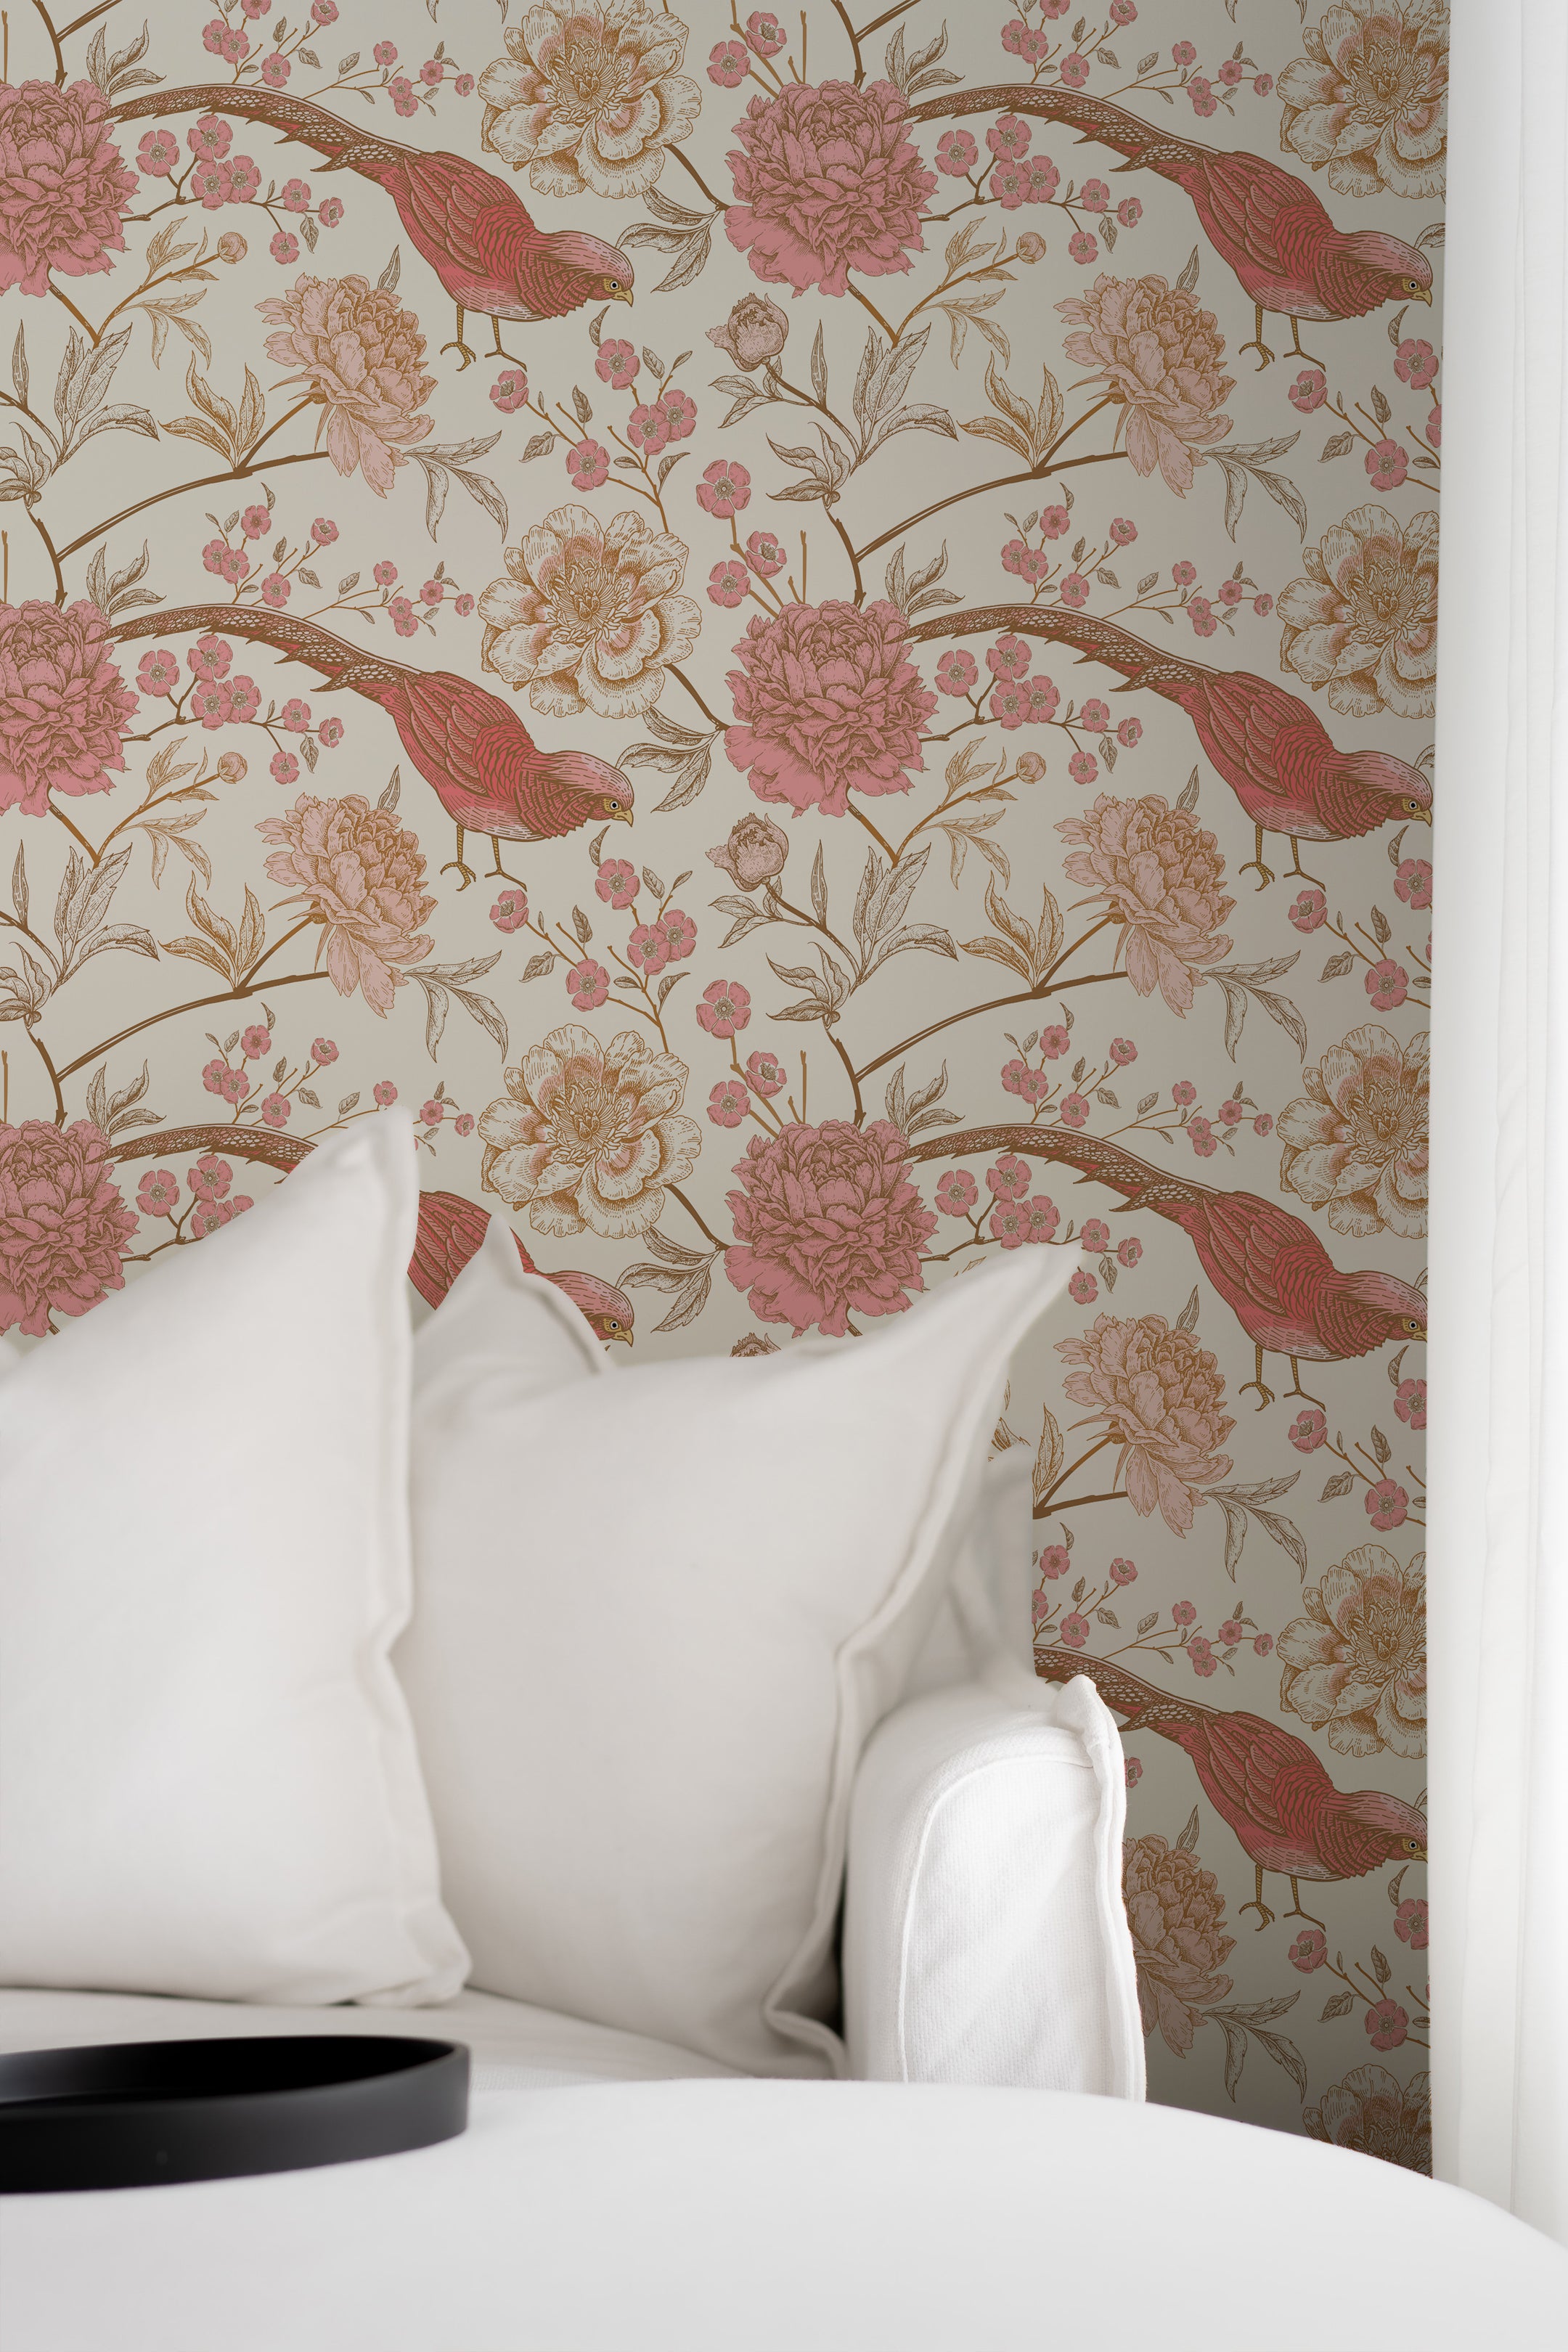 Cozy corner of a room decorated with Peonies and Pheasants Wallpaper, featuring red pheasants and pink peonies against a cream background. The scene includes soft white pillows, creating a tranquil and stylish ambiance